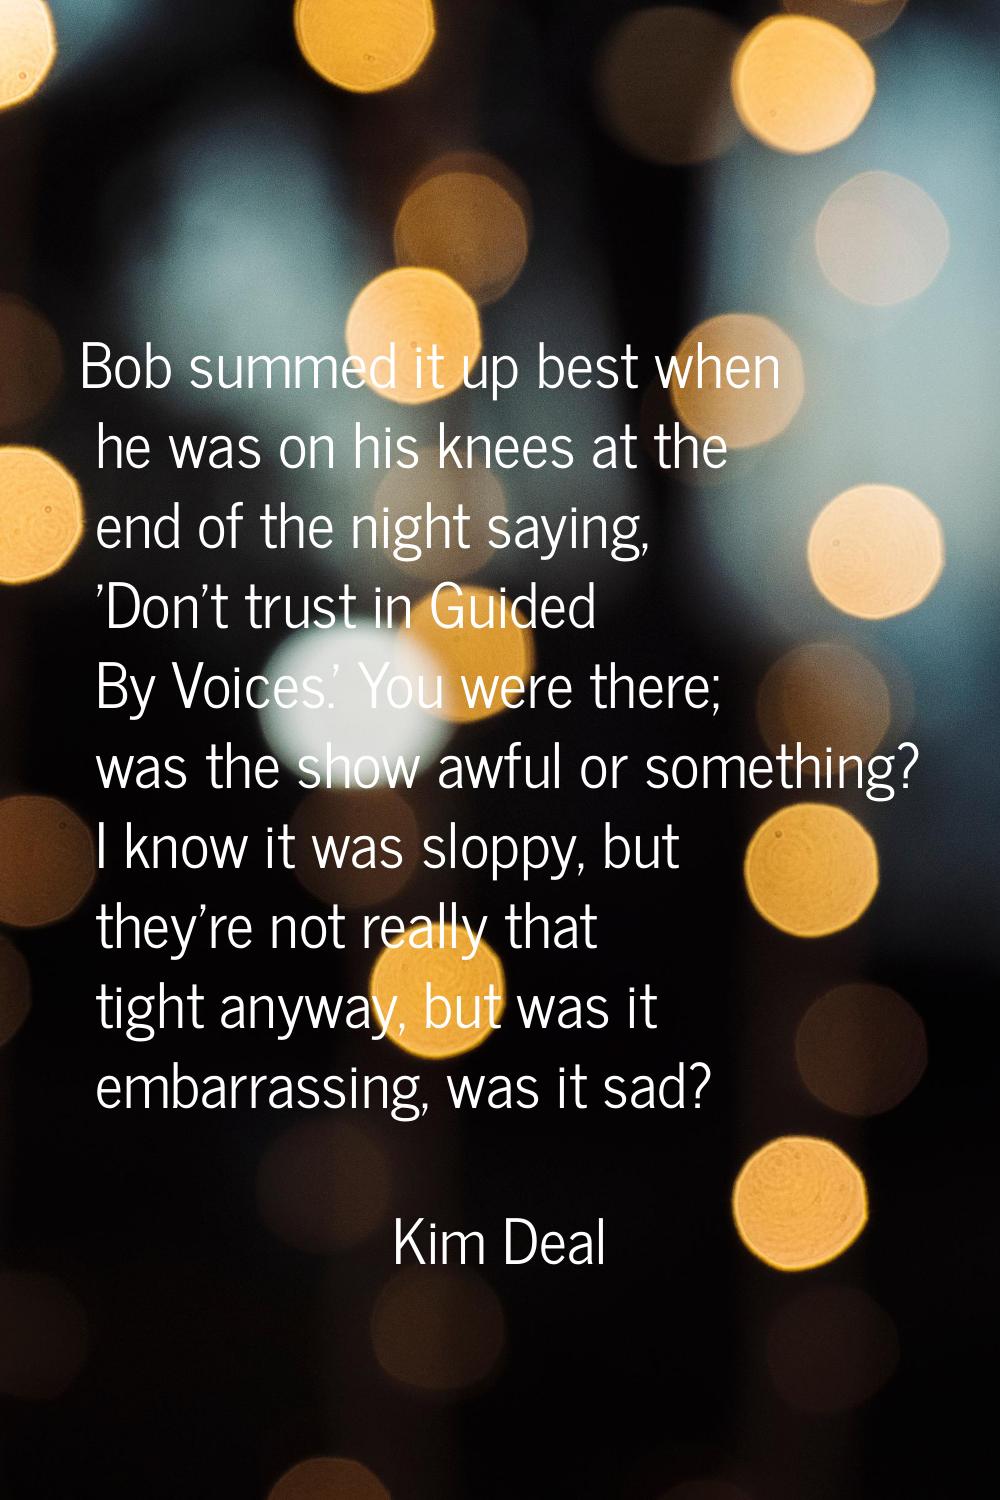 Bob summed it up best when he was on his knees at the end of the night saying, 'Don't trust in Guid